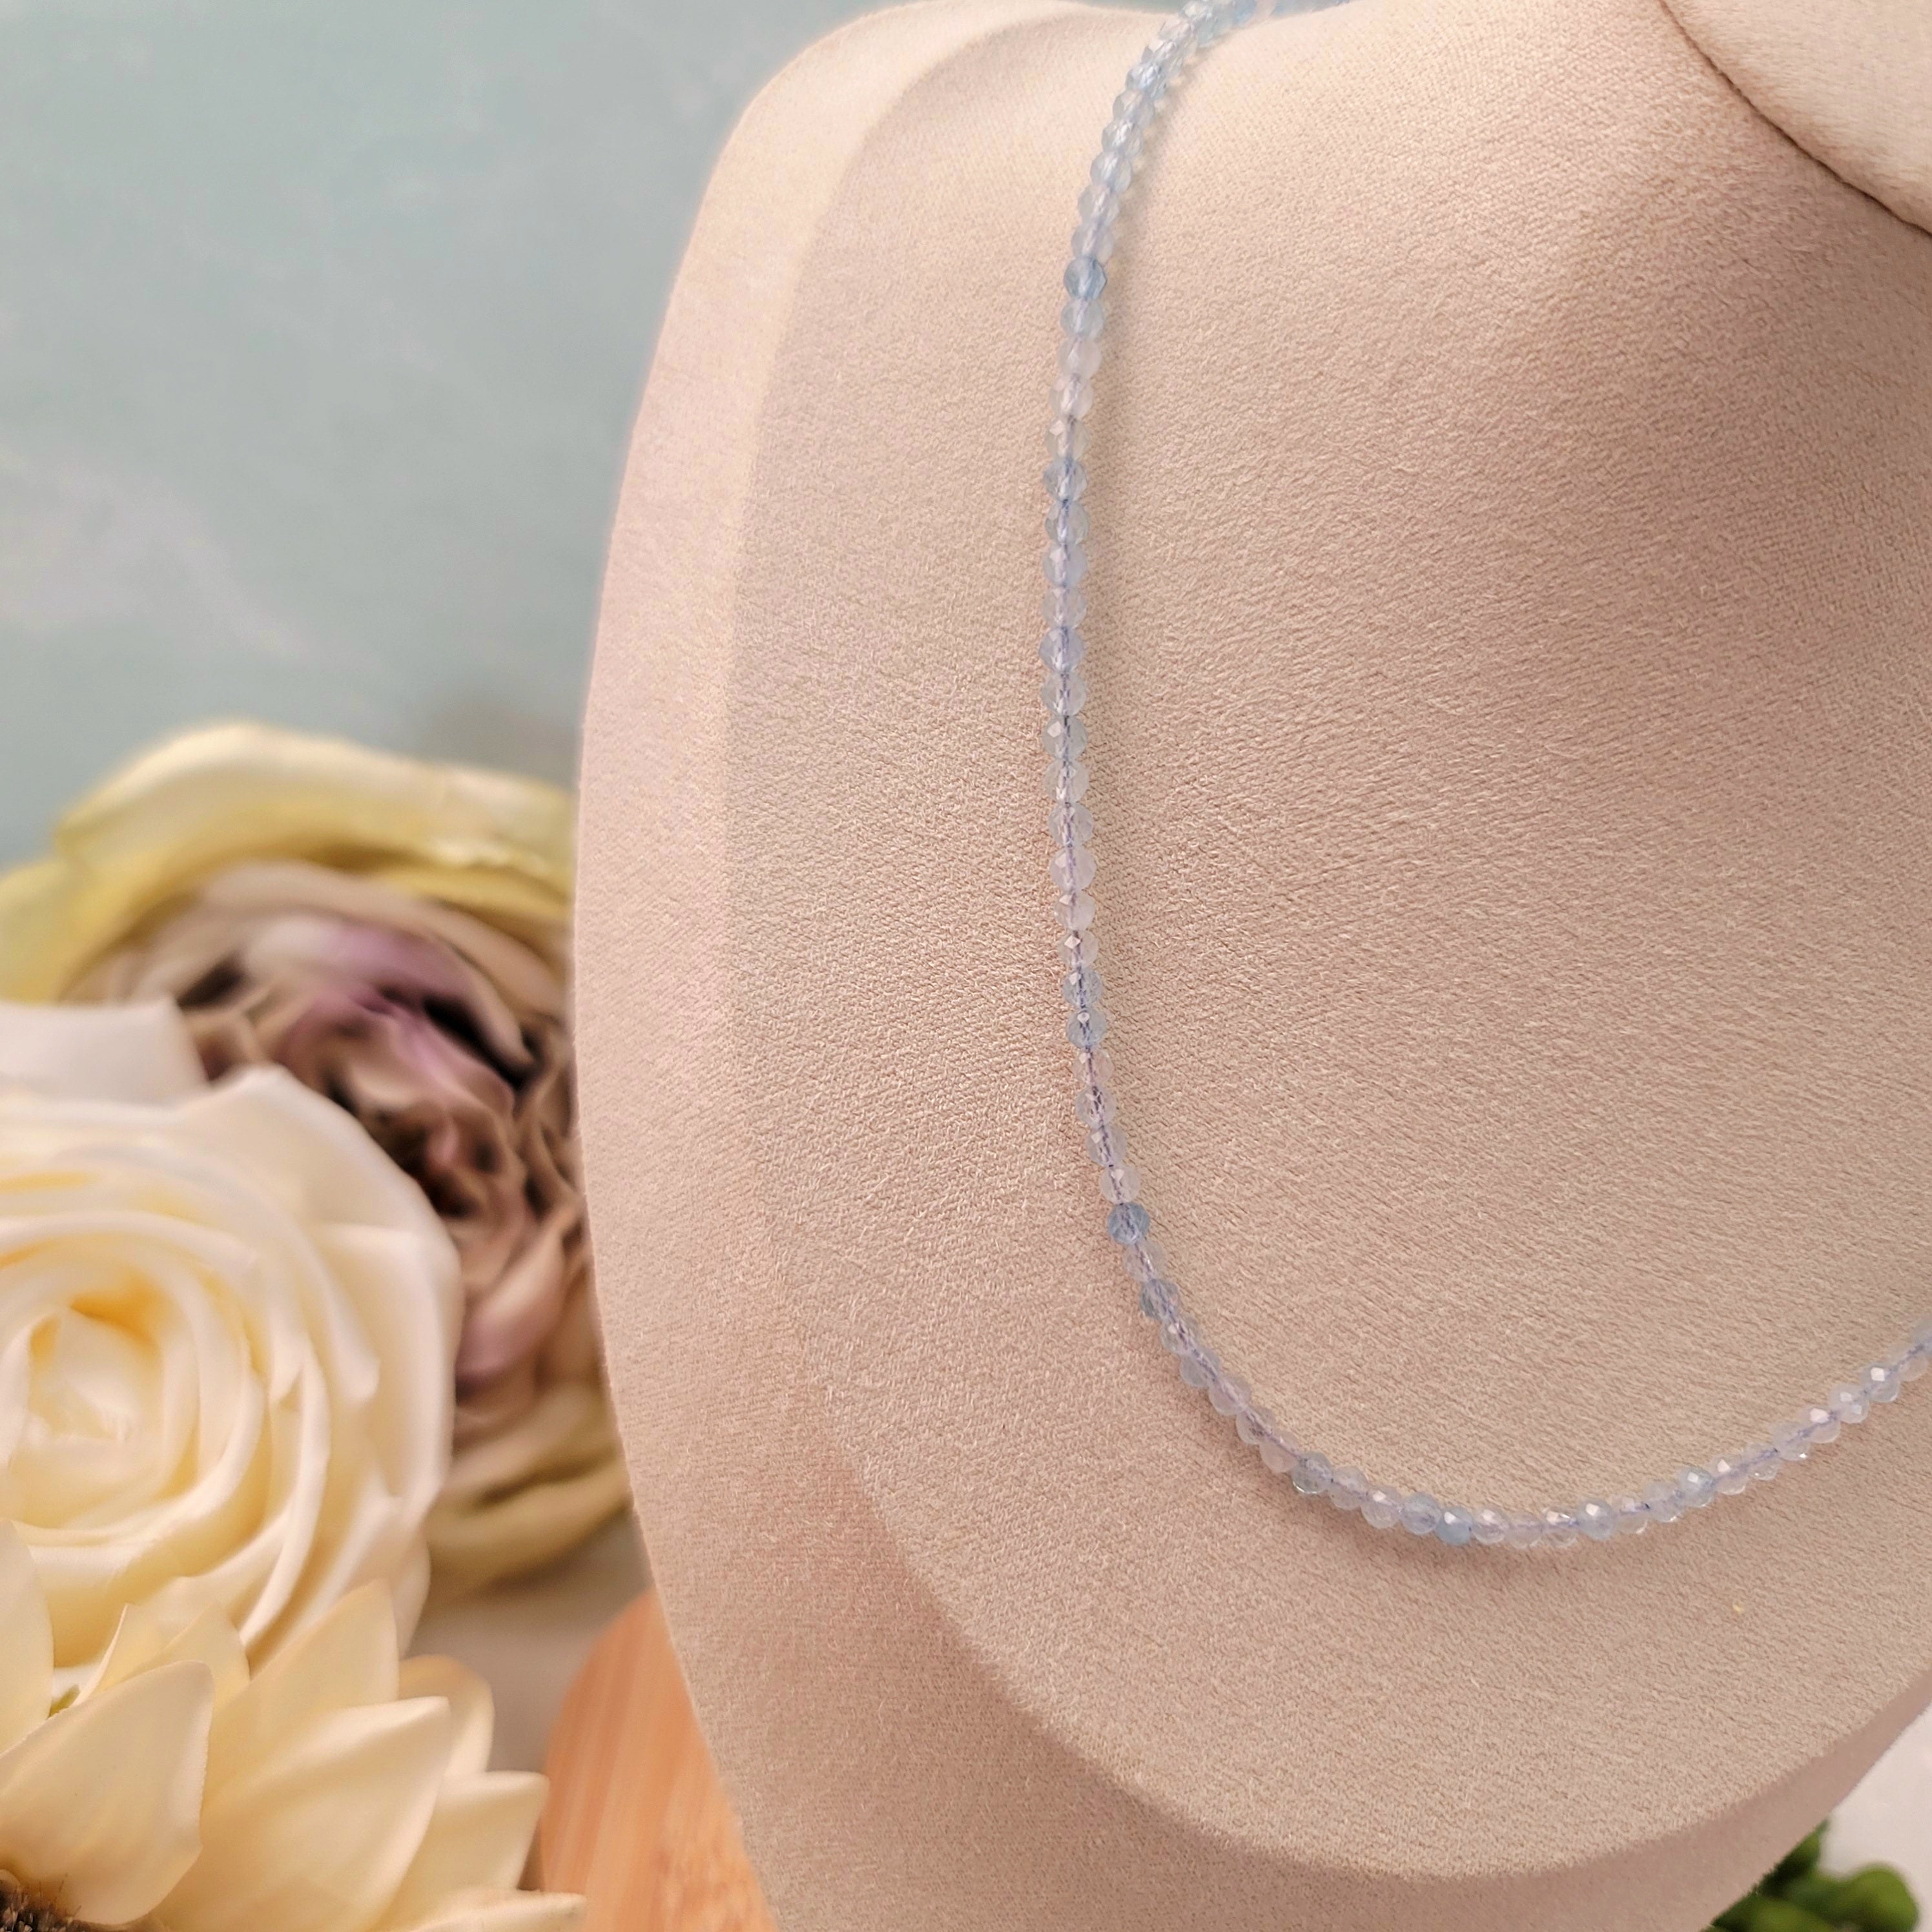 Aquamarine Micro Faceted Choker/Layering Necklace for Calm Communication